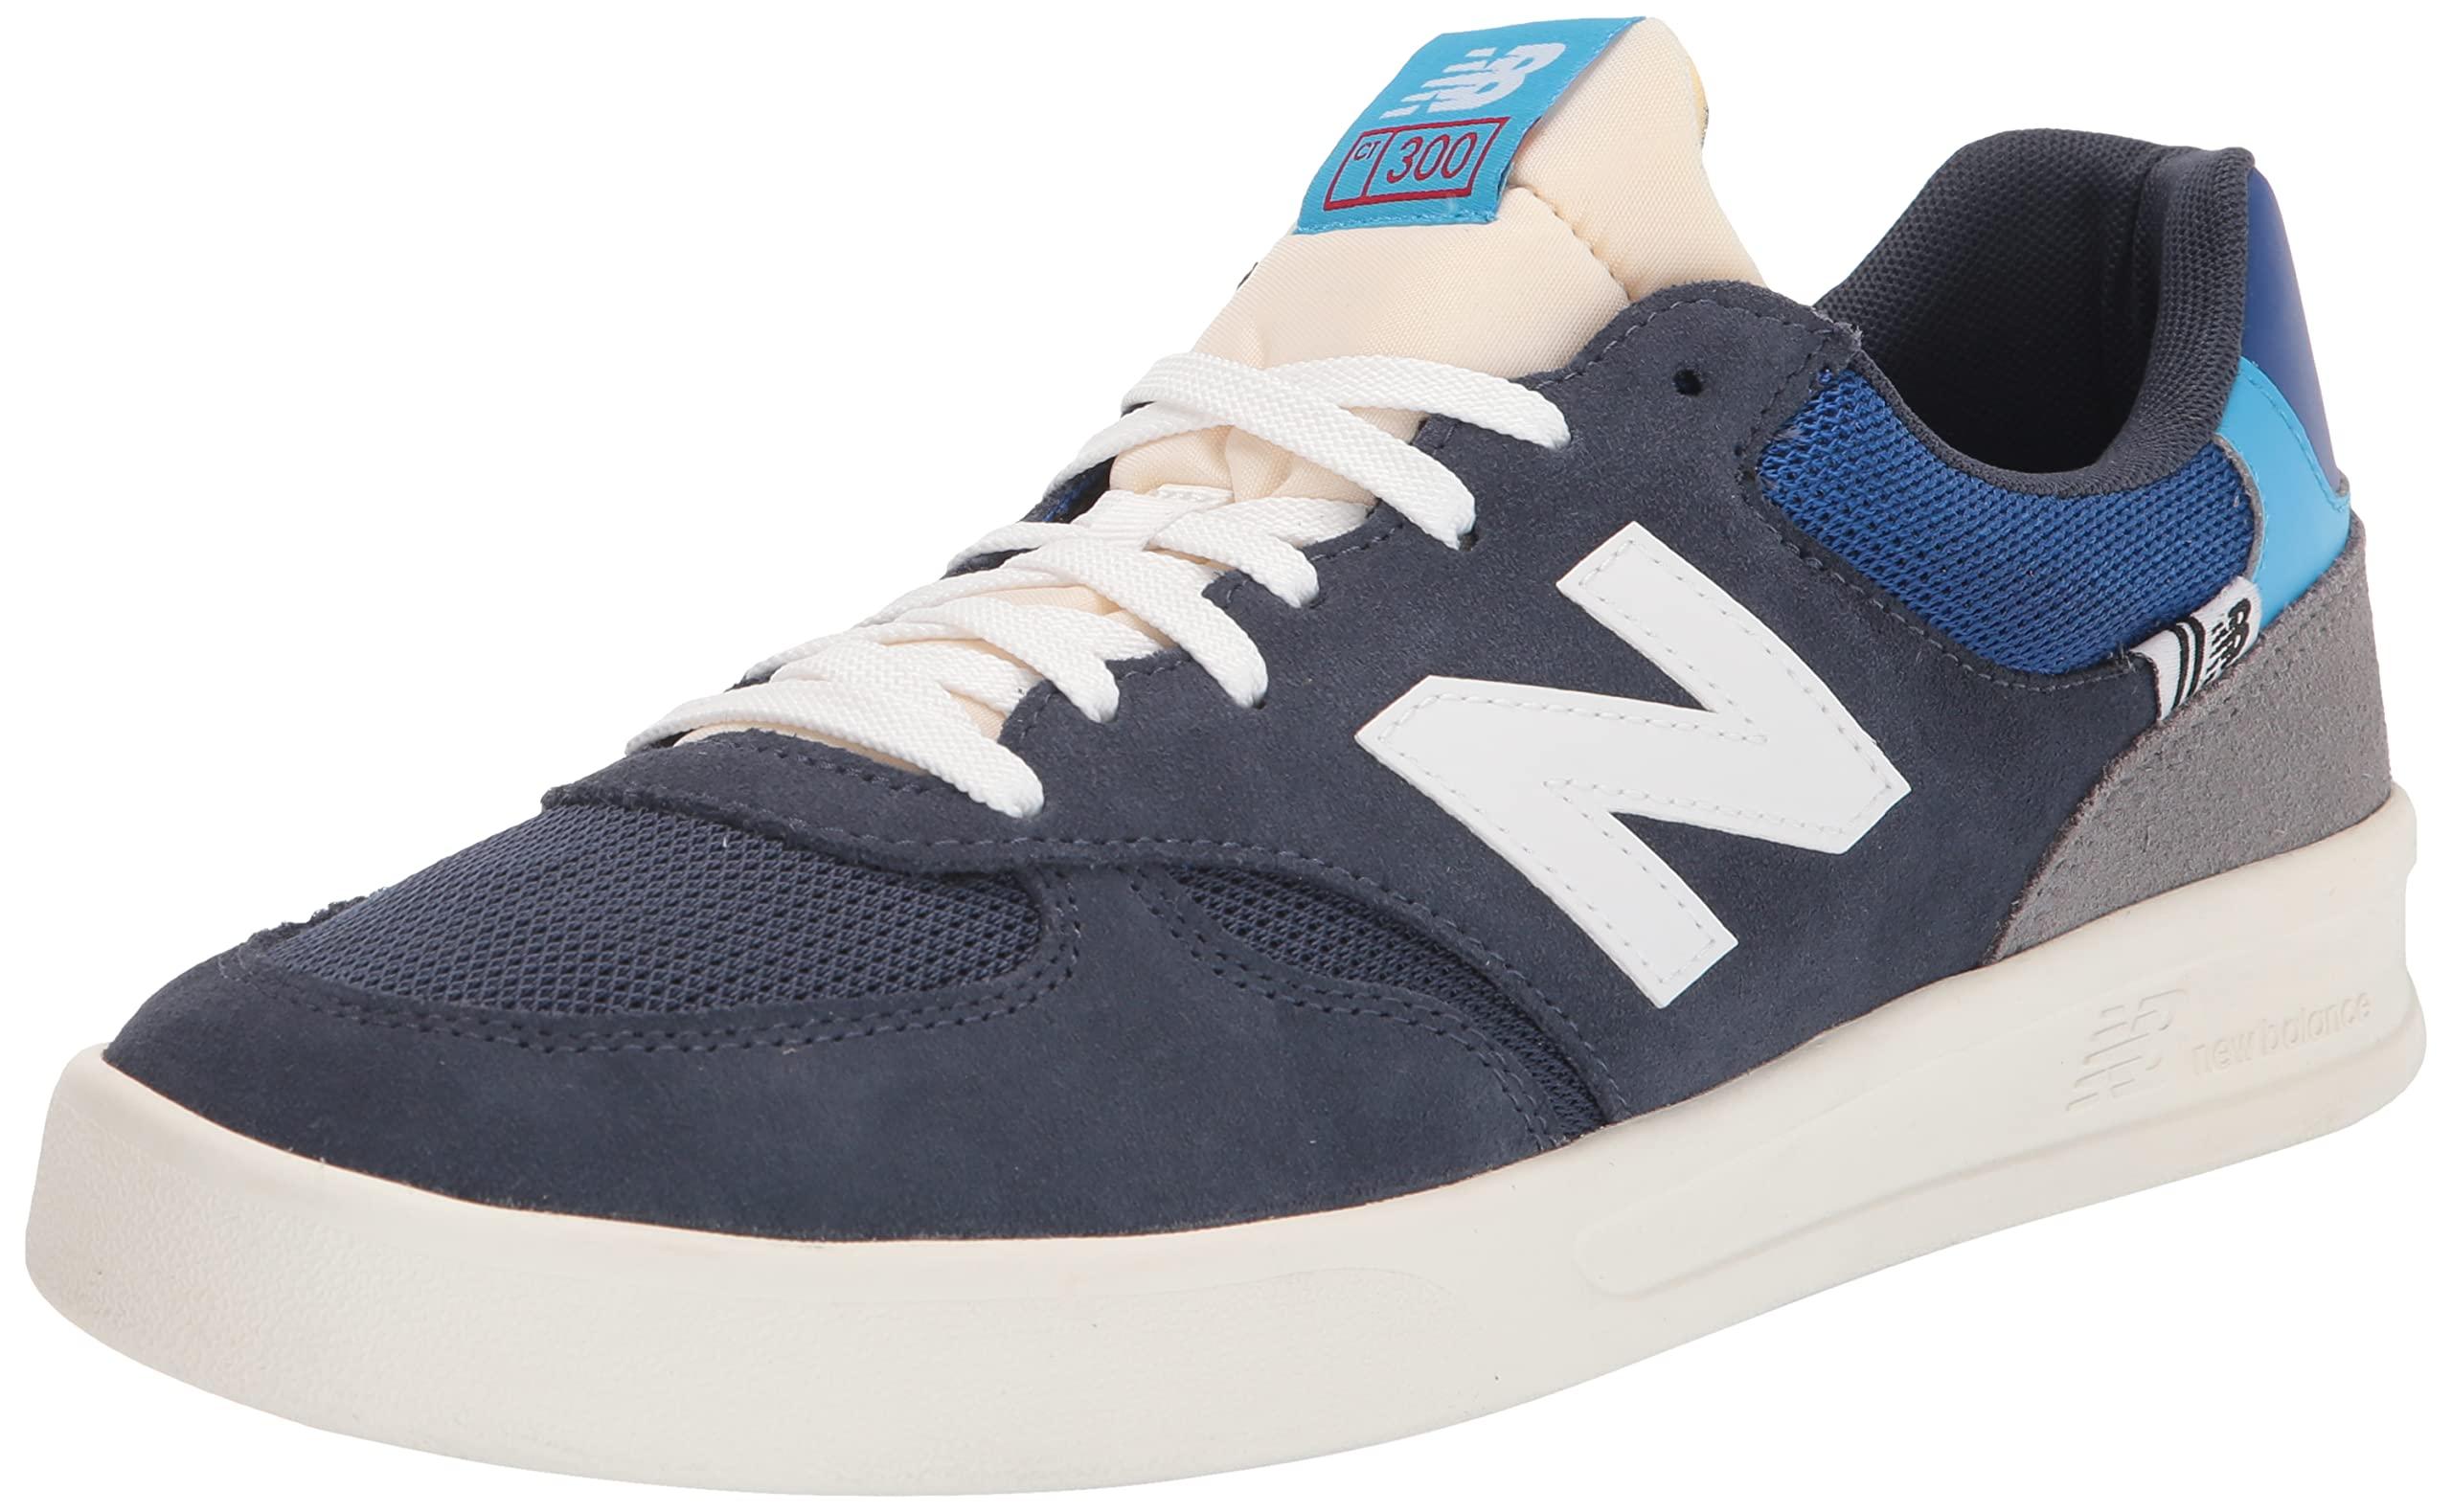 New Balance 300 Court S Trainers in Navy/White (Blue) for Men - Save 9% |  Lyst